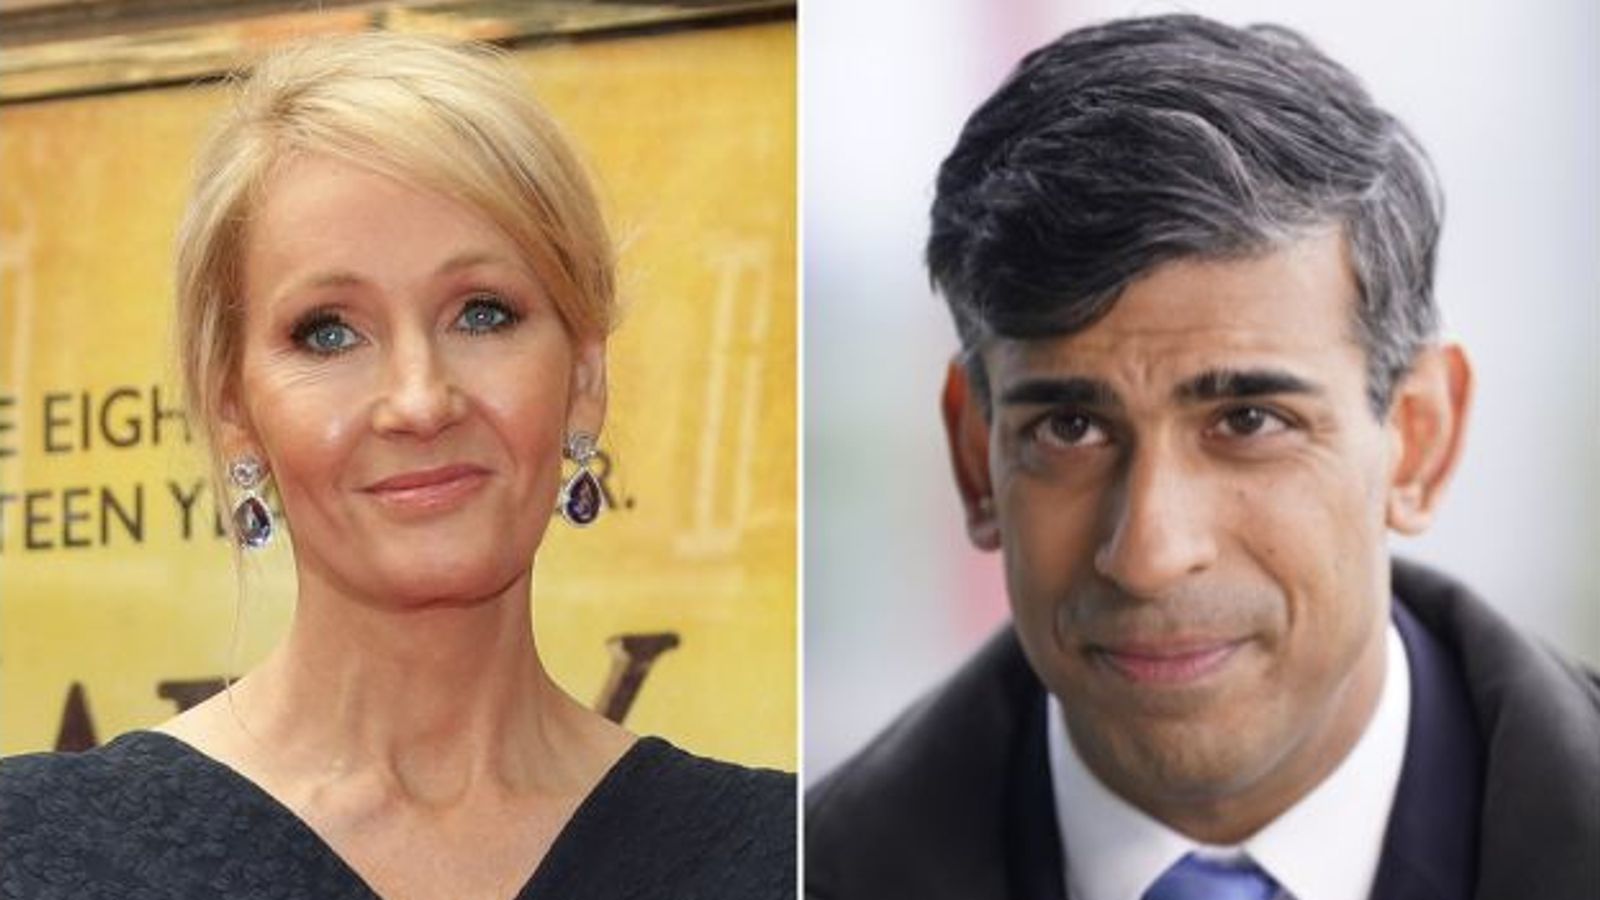 PM backs JK Rowling as row over Scotland's new hate crime laws escalates